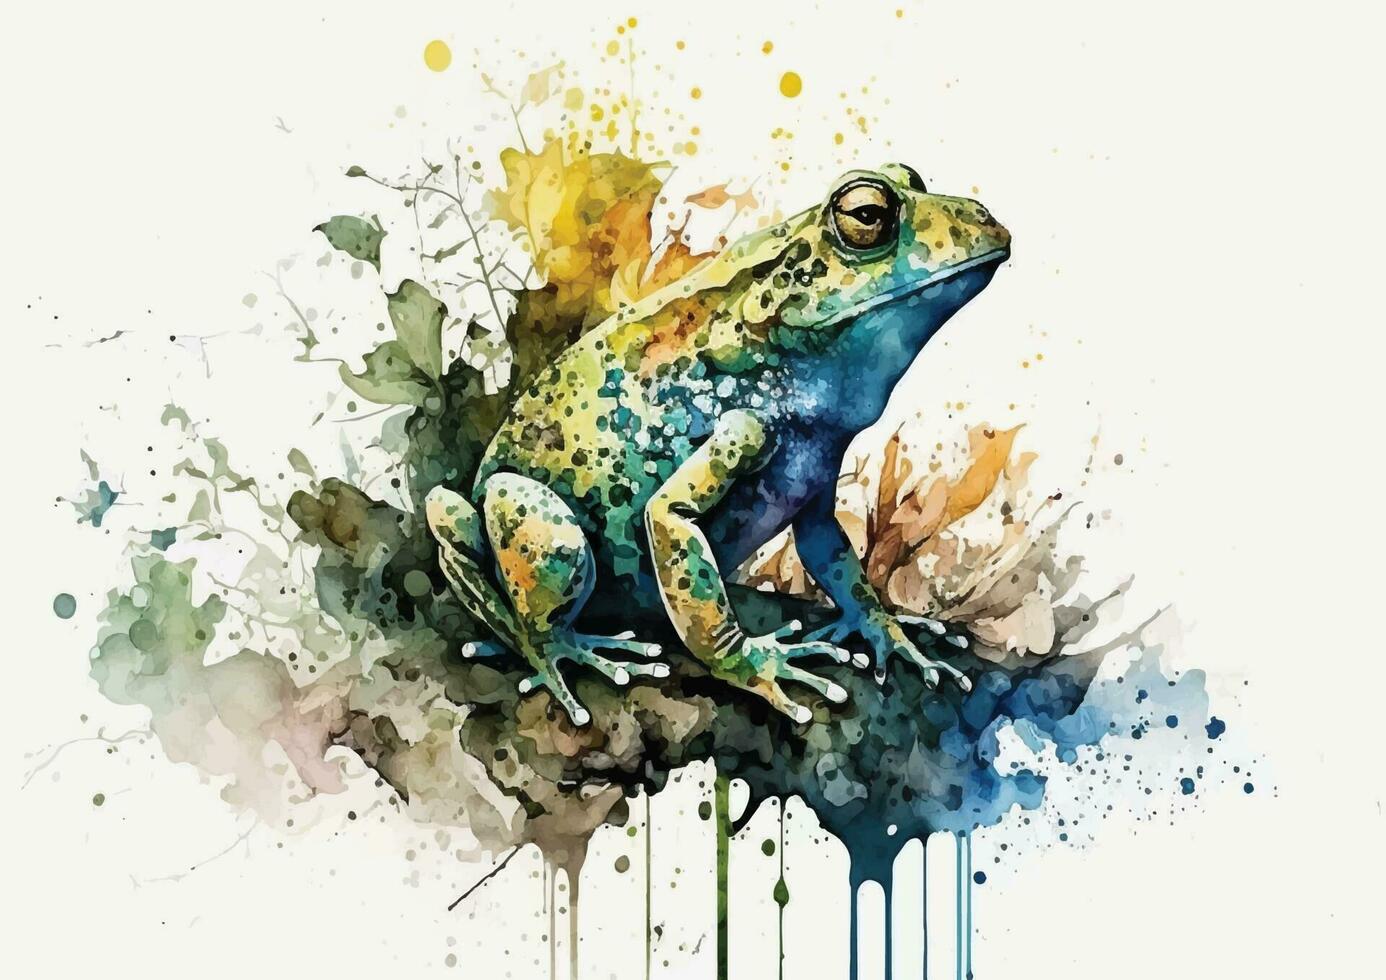 These watercolor vector designs of frogs and dragonflies offer a sense of playfulness and whimsy to any space